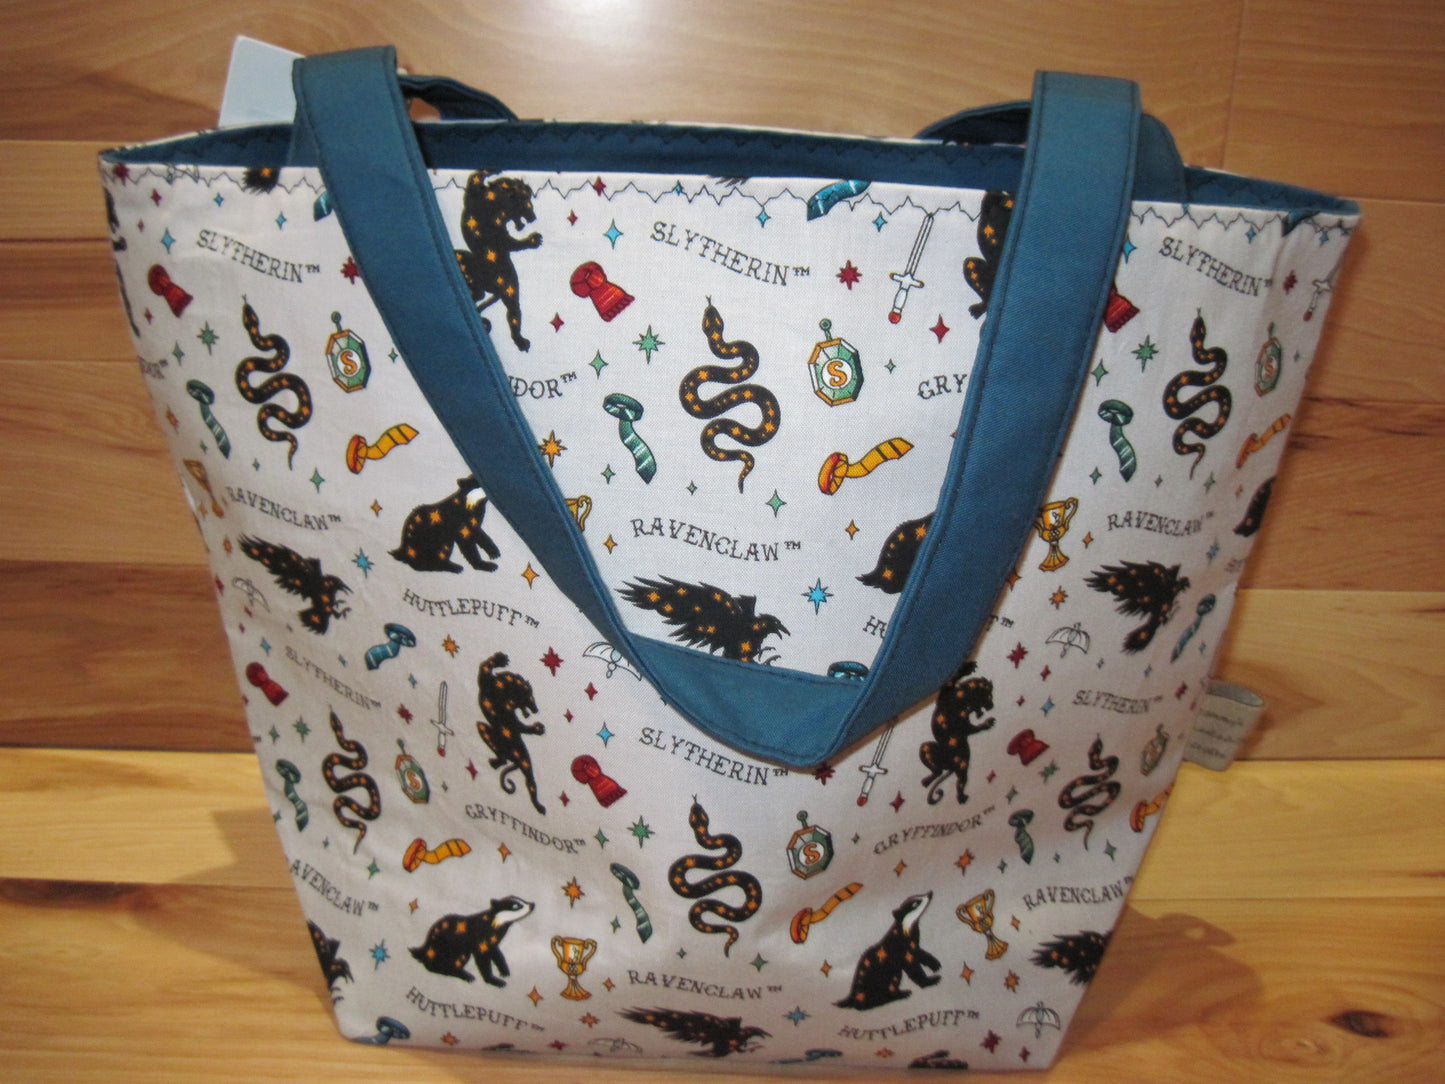 Large Tote Style Bag ~ Ravenclaw House w/ blue & sewn handles